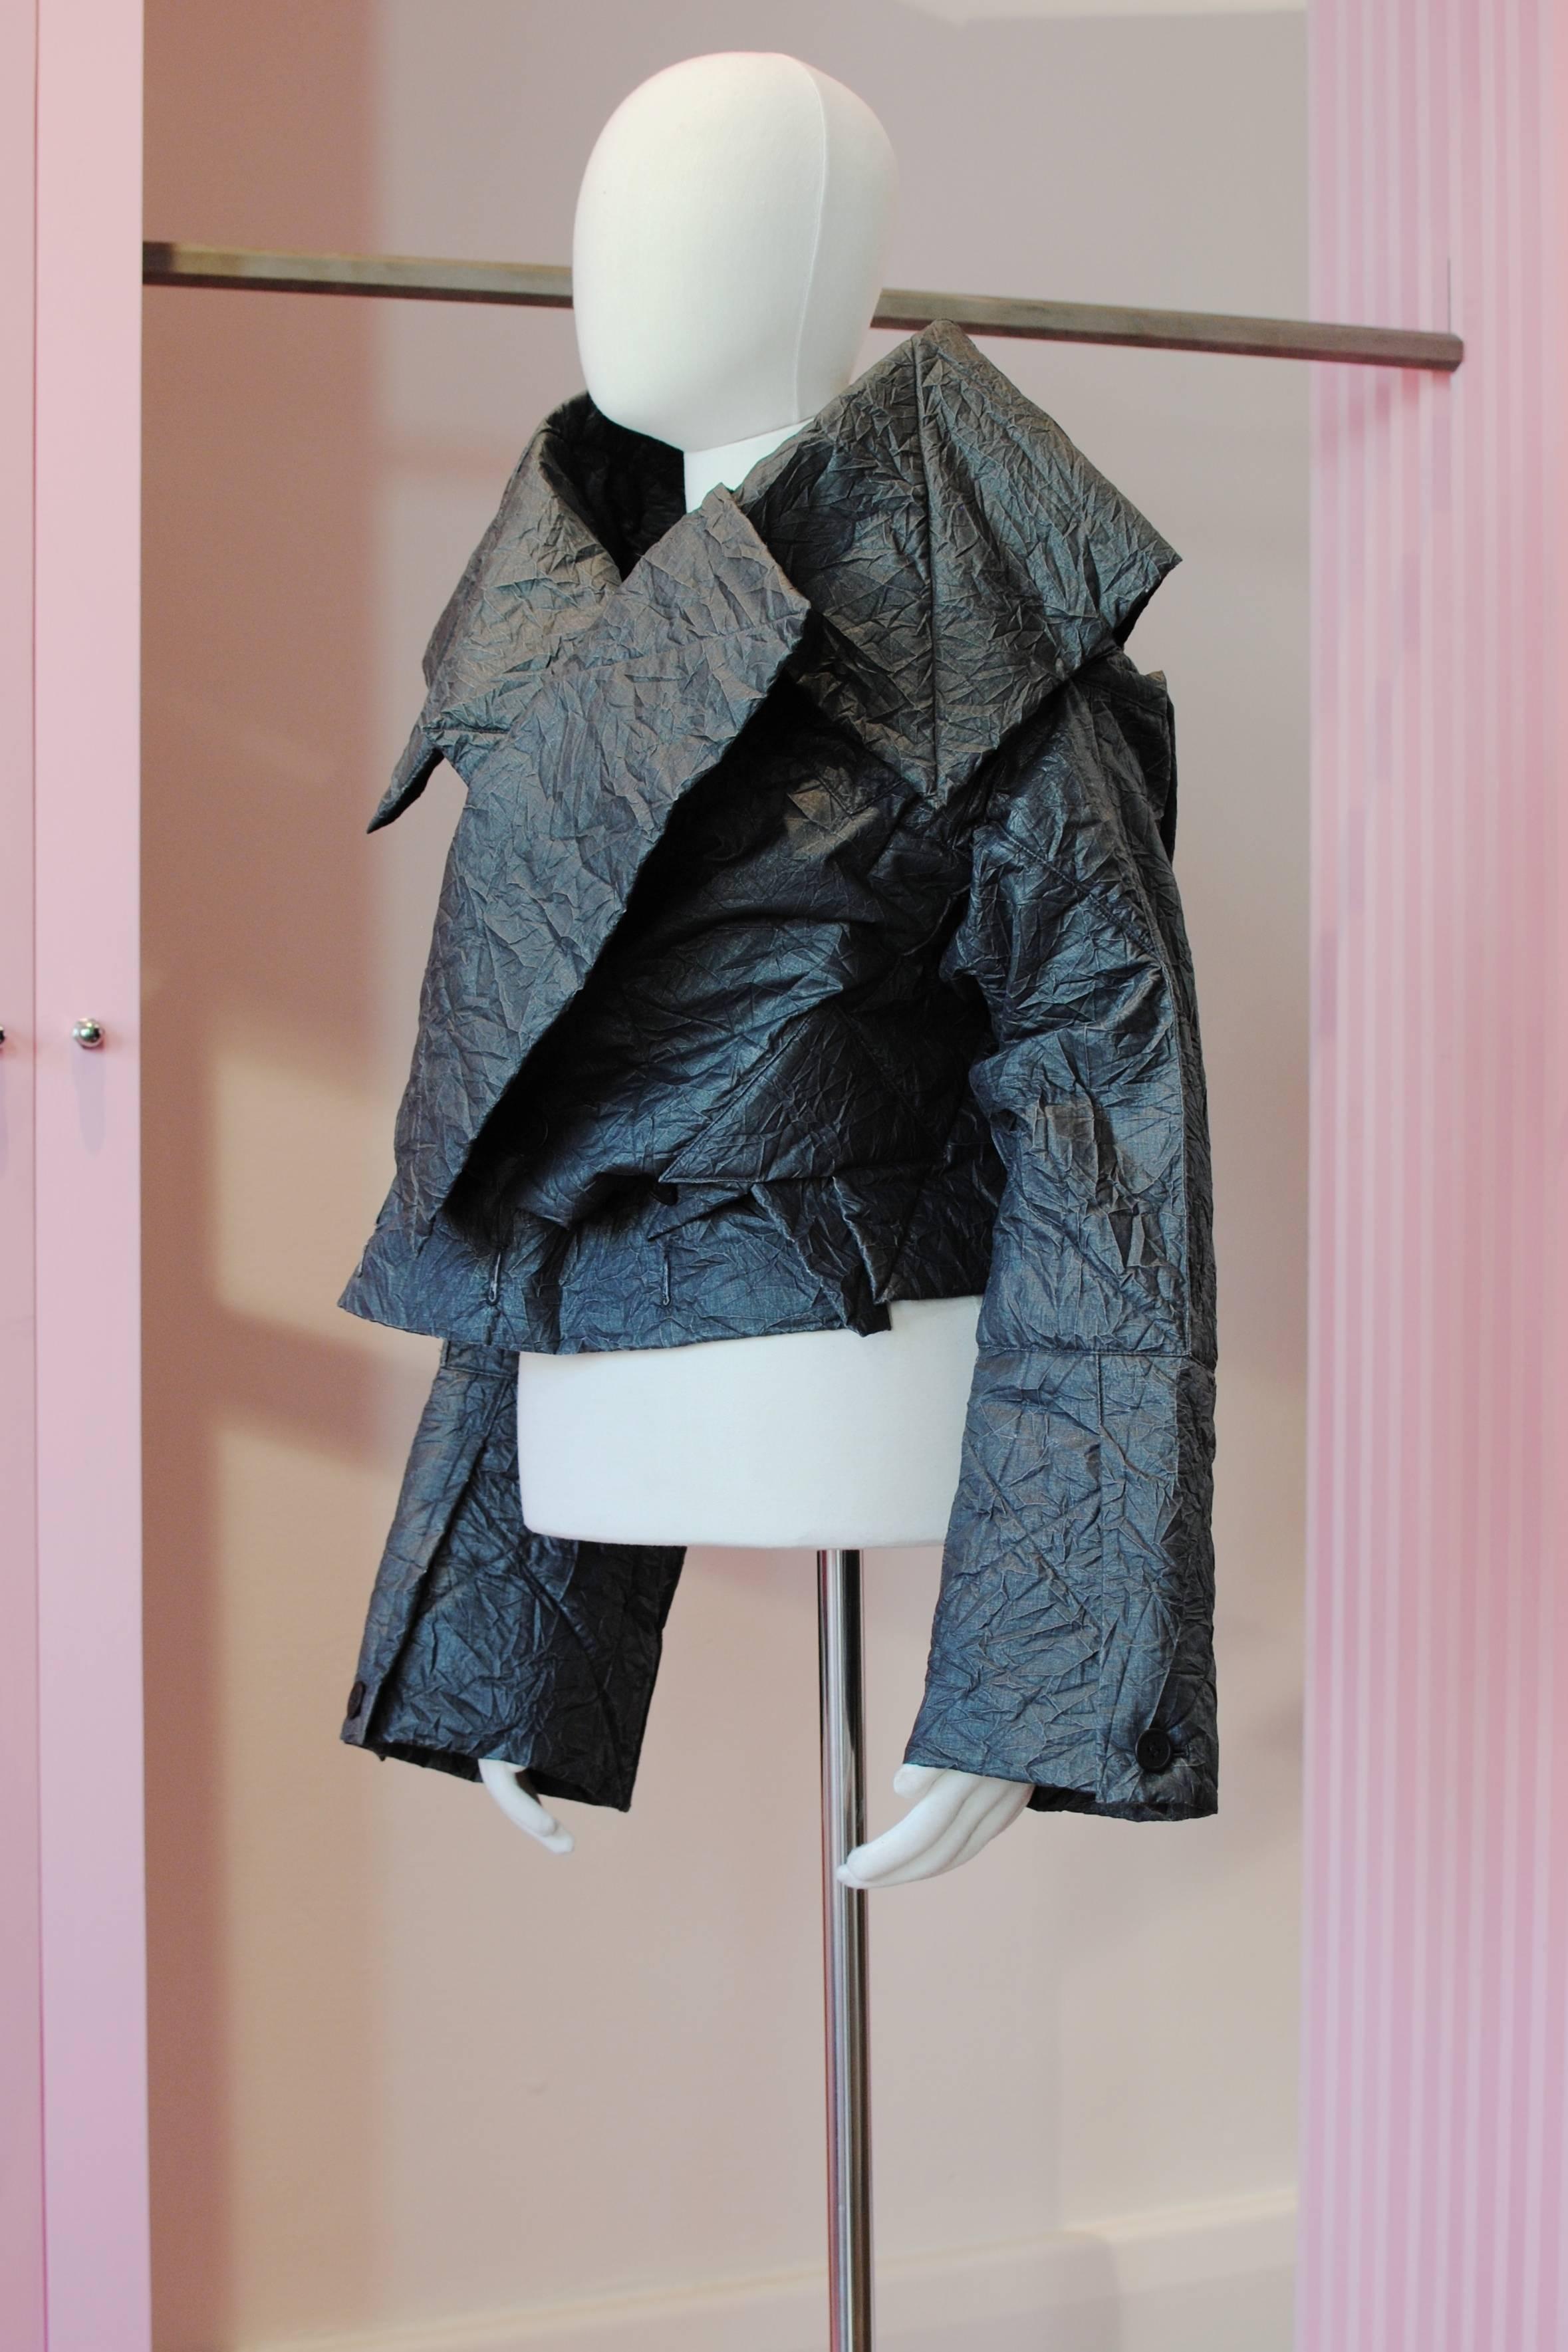 Issey Miyake black crinkle origami jacket from the 1998 Autumn/Winter collection. It features stiff creased fabric with polyester batting , two waist pockets and is designed to also be worn upside down for a different look.

Size —